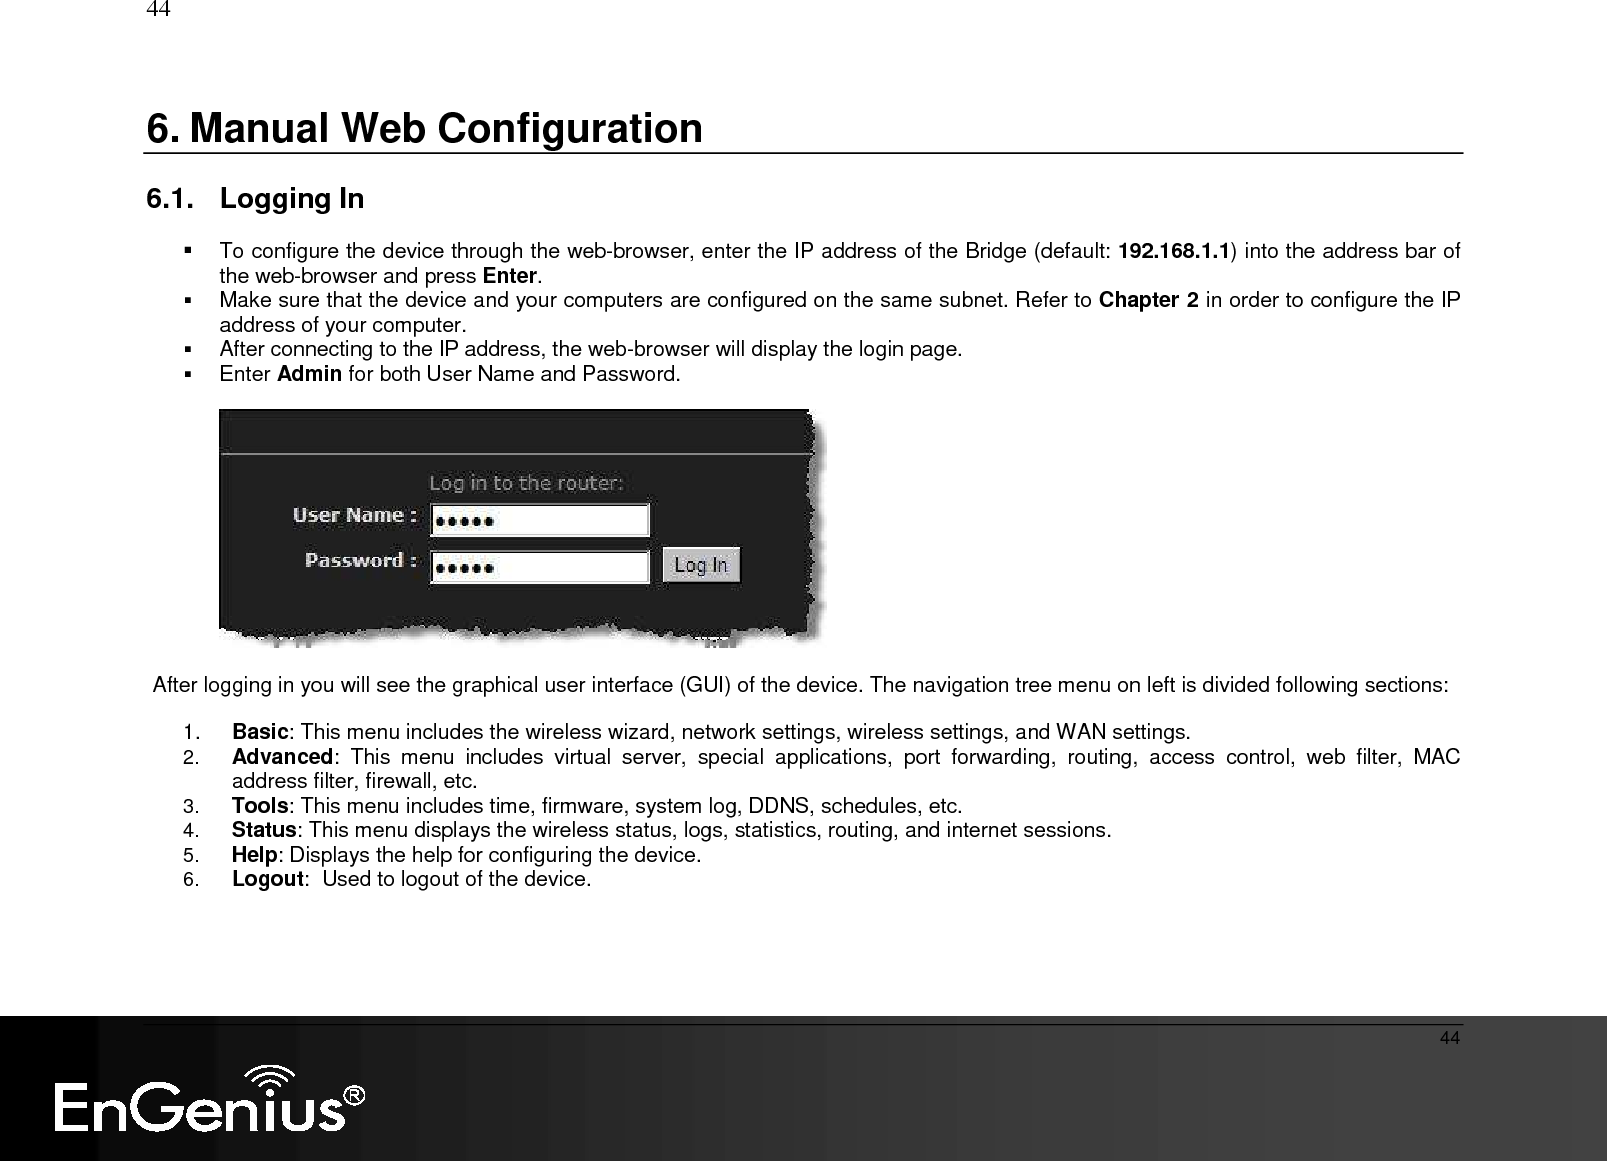   44  44 6. Manual Web Configuration  6.1.  Logging In    To configure the device through the web-browser, enter the IP address of the Bridge (default: 192.168.1.1) into the address bar of the web-browser and press Enter.   Make sure that the device and your computers are configured on the same subnet. Refer to Chapter 2 in order to configure the IP address of your computer.  After connecting to the IP address, the web-browser will display the login page.   Enter Admin for both User Name and Password.      After logging in you will see the graphical user interface (GUI) of the device. The navigation tree menu on left is divided following sections:  1.  Basic: This menu includes the wireless wizard, network settings, wireless settings, and WAN settings. 2. Advanced:  This  menu  includes  virtual  server,  special  applications,  port  forwarding,  routing,  access  control,  web  filter,  MAC address filter, firewall, etc.  3. Tools: This menu includes time, firmware, system log, DDNS, schedules, etc.   4. Status: This menu displays the wireless status, logs, statistics, routing, and internet sessions.   5. Help: Displays the help for configuring the device. 6. Logout:  Used to logout of the device.   